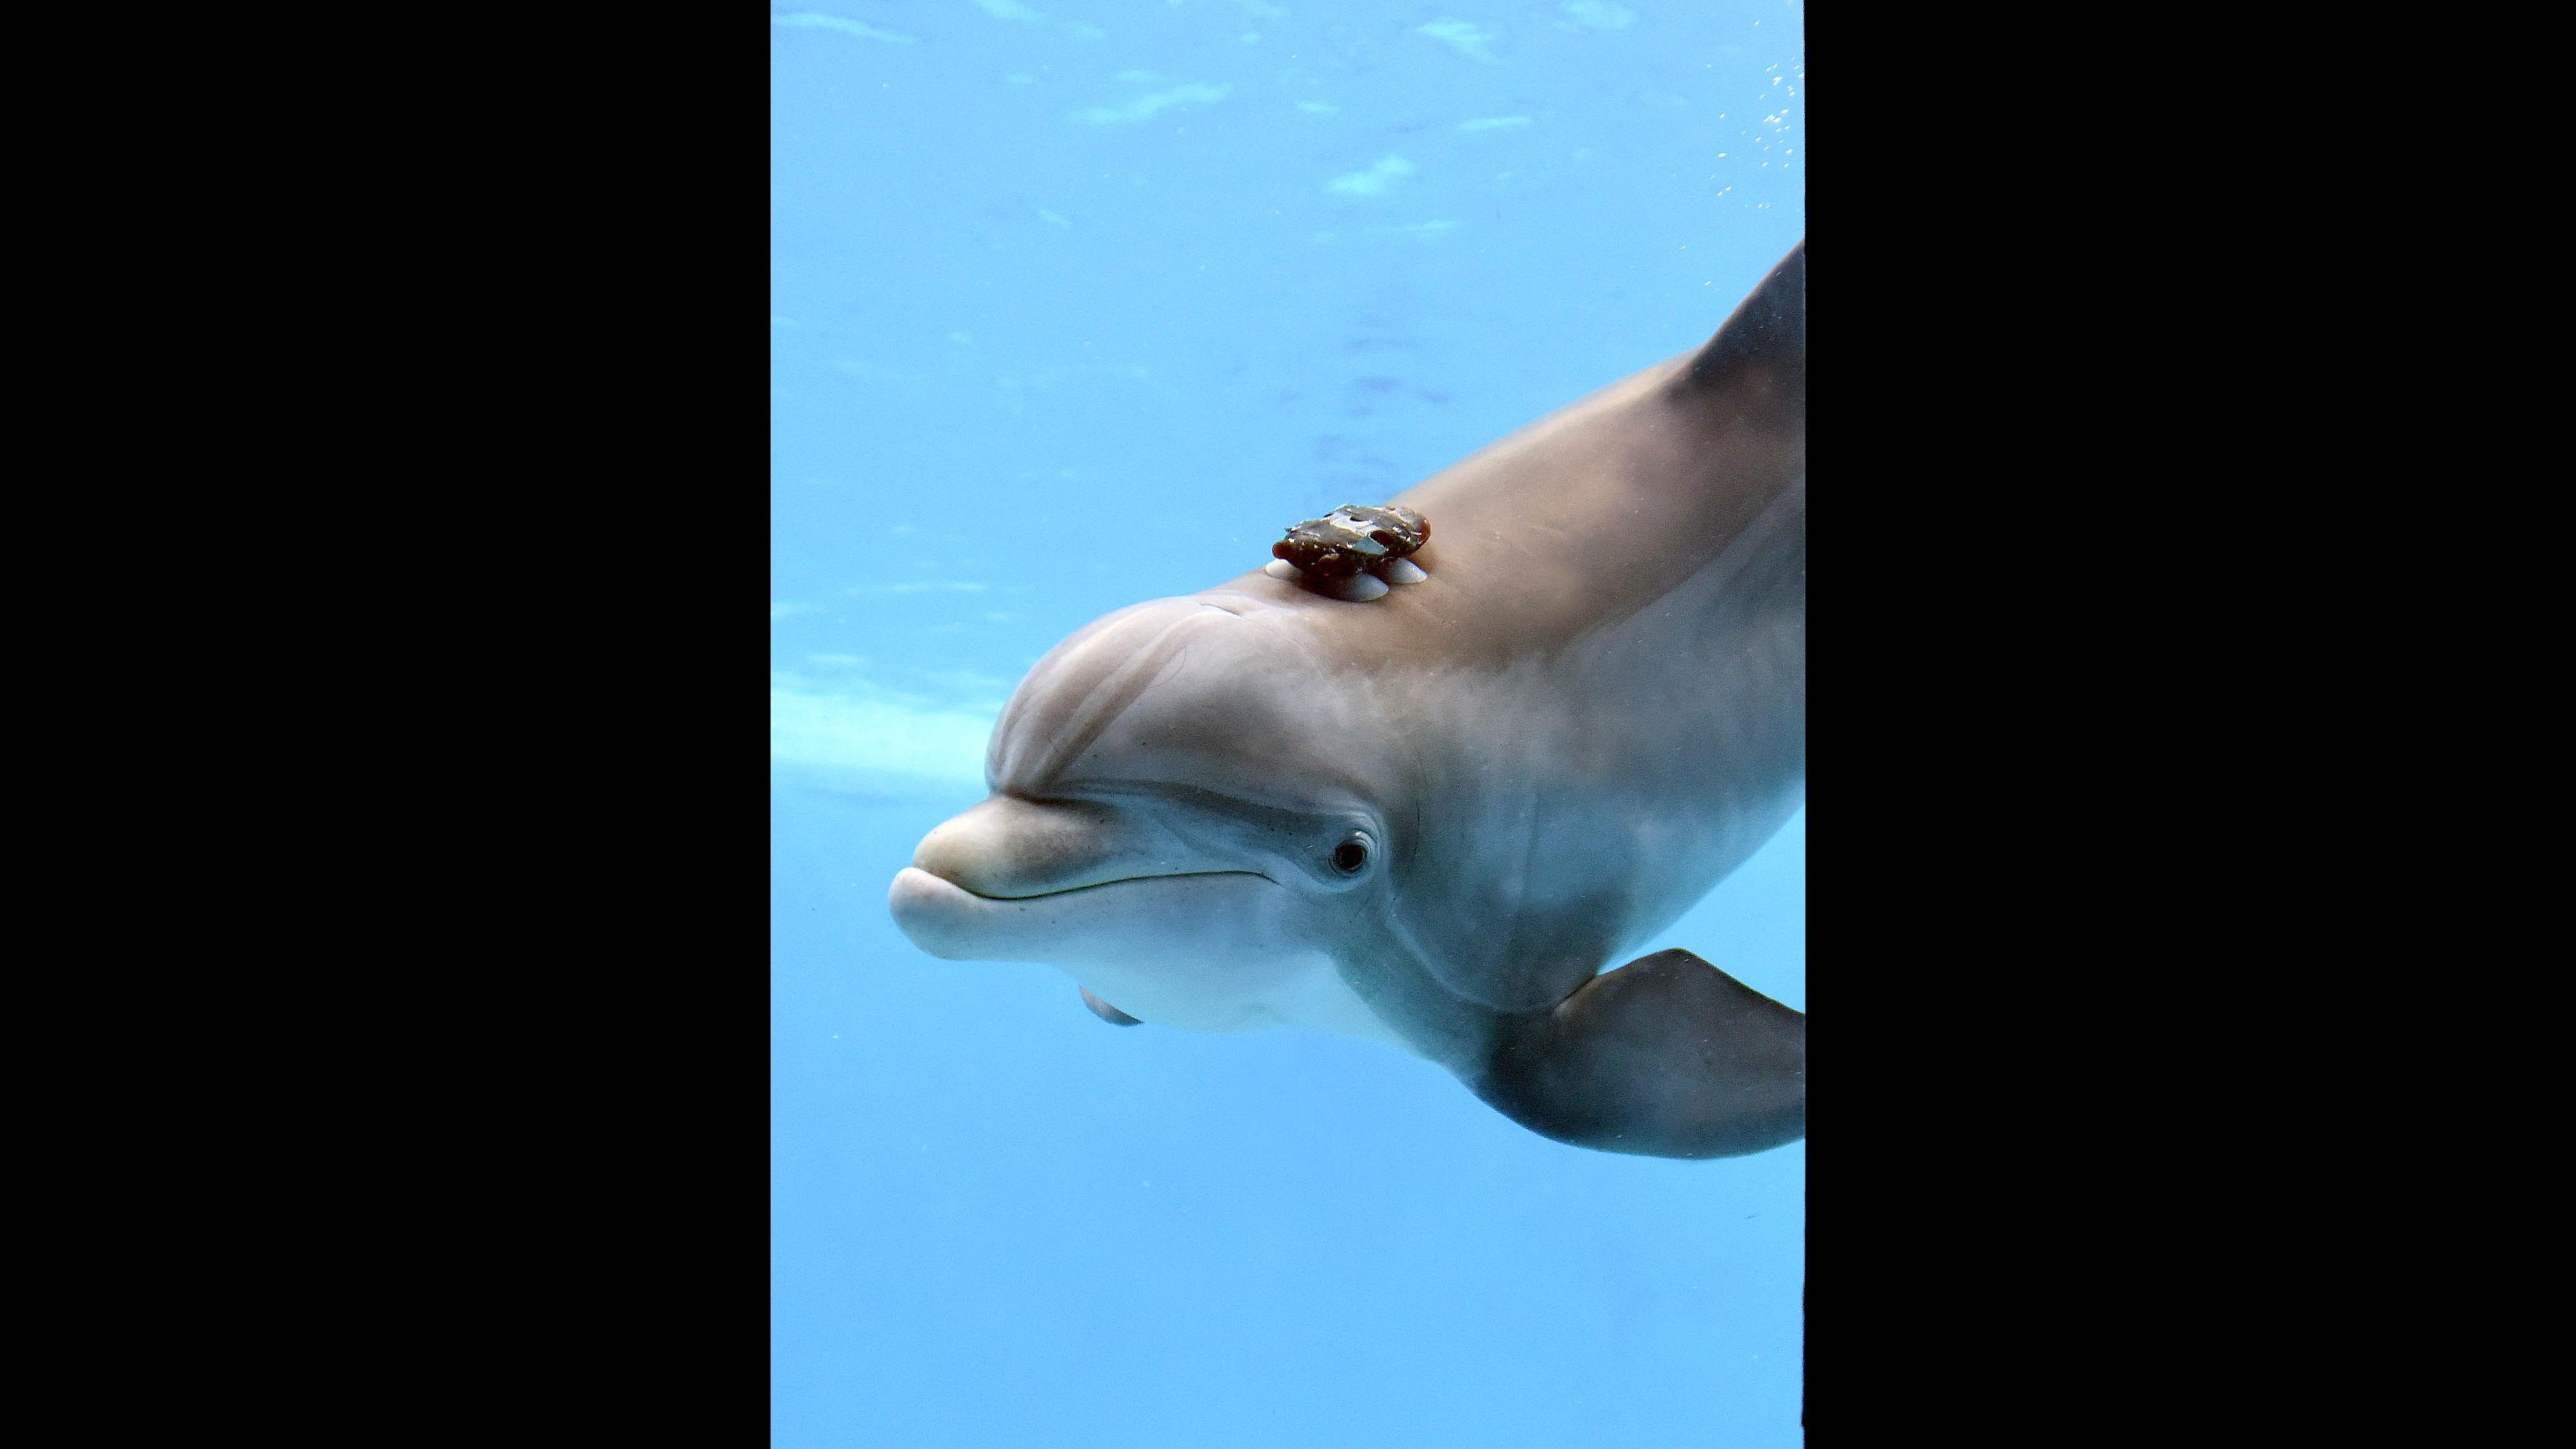 A bottlenose dolphin at Brookfield Zoo wears a biol-logging device to measure her activity levels and movement. (Courtesy Chicago Zoological Society)